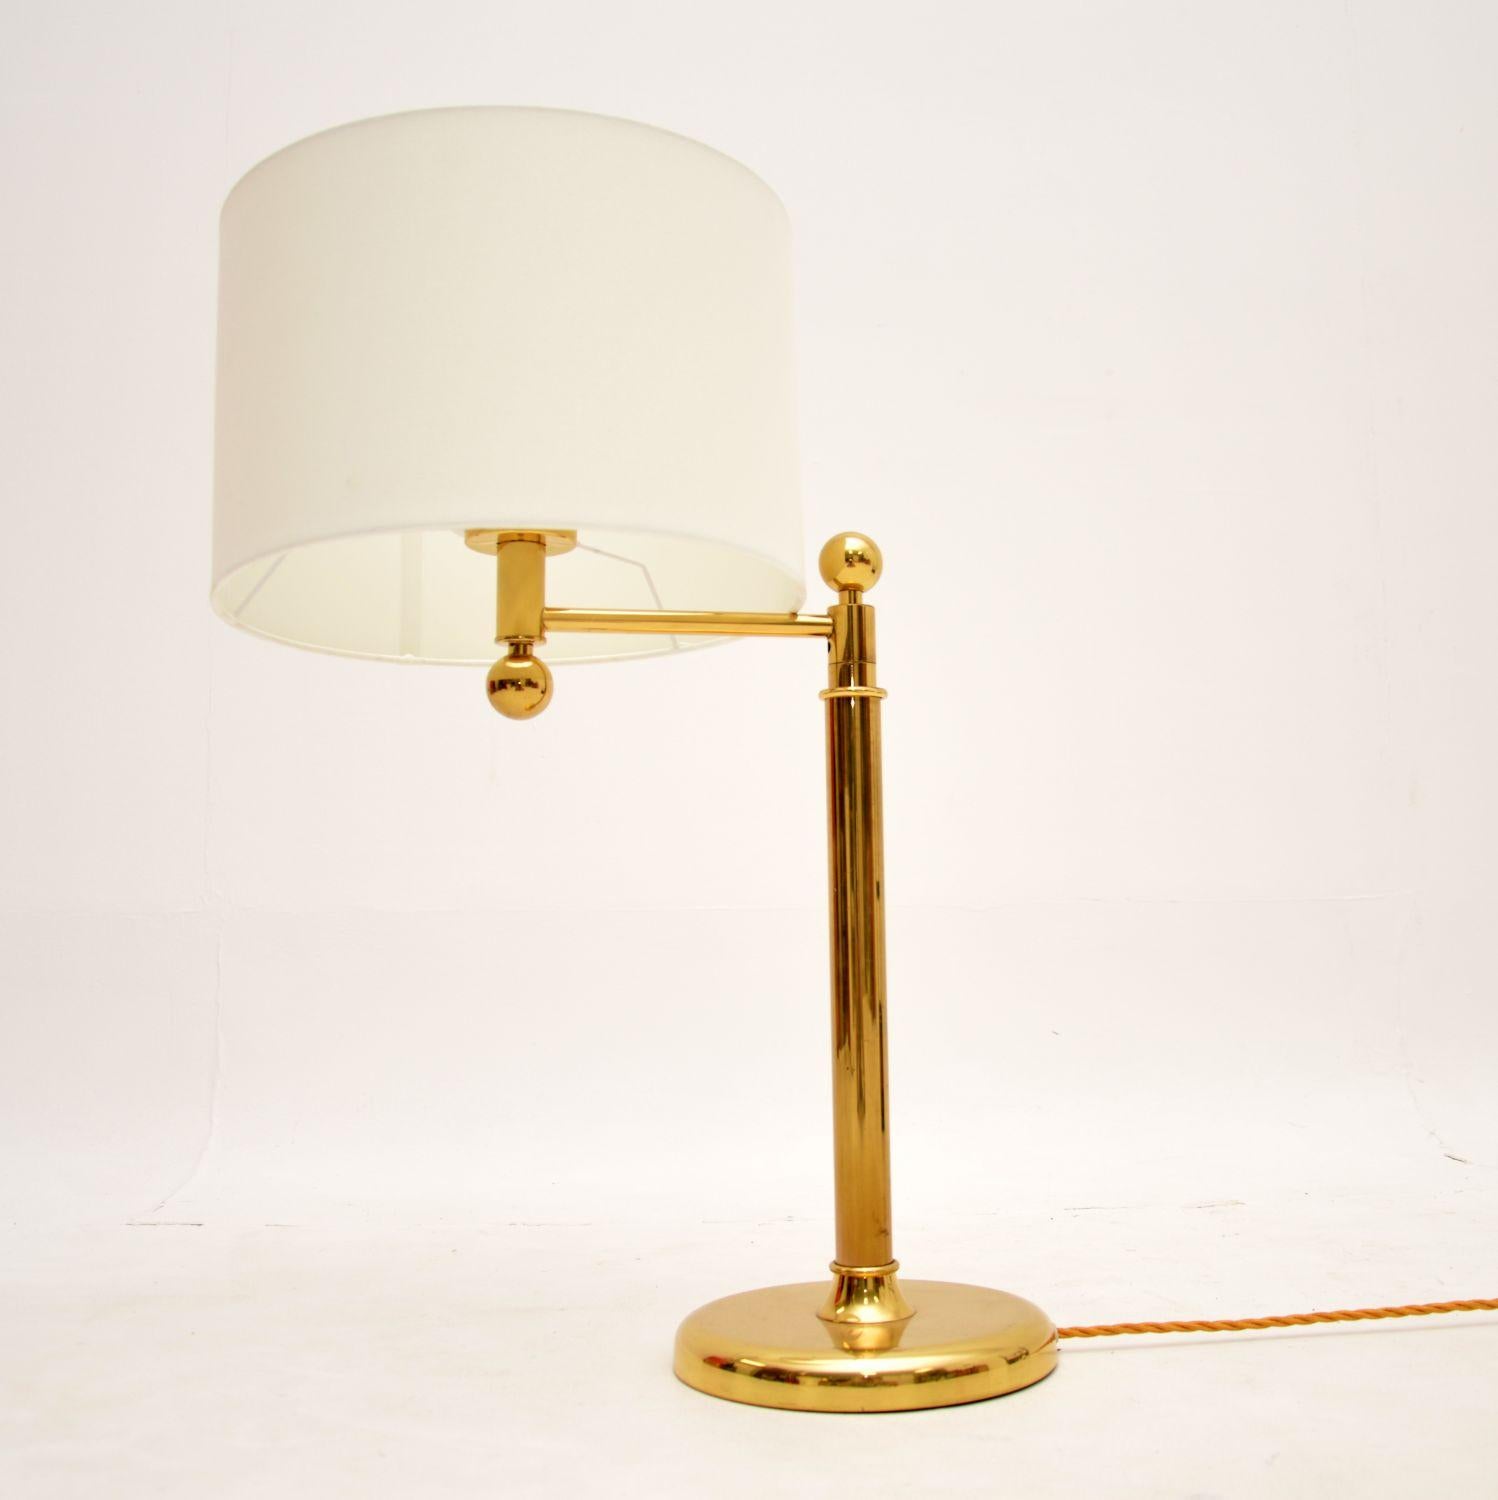 A very stylish and well made vintage brass table / desk lamp. This was made in Spain, it dates from around the 1970’s.

It is of fantastic quality, with a well made brass frame. The neck swivels round 360 degrees, so this is perfect as a desk